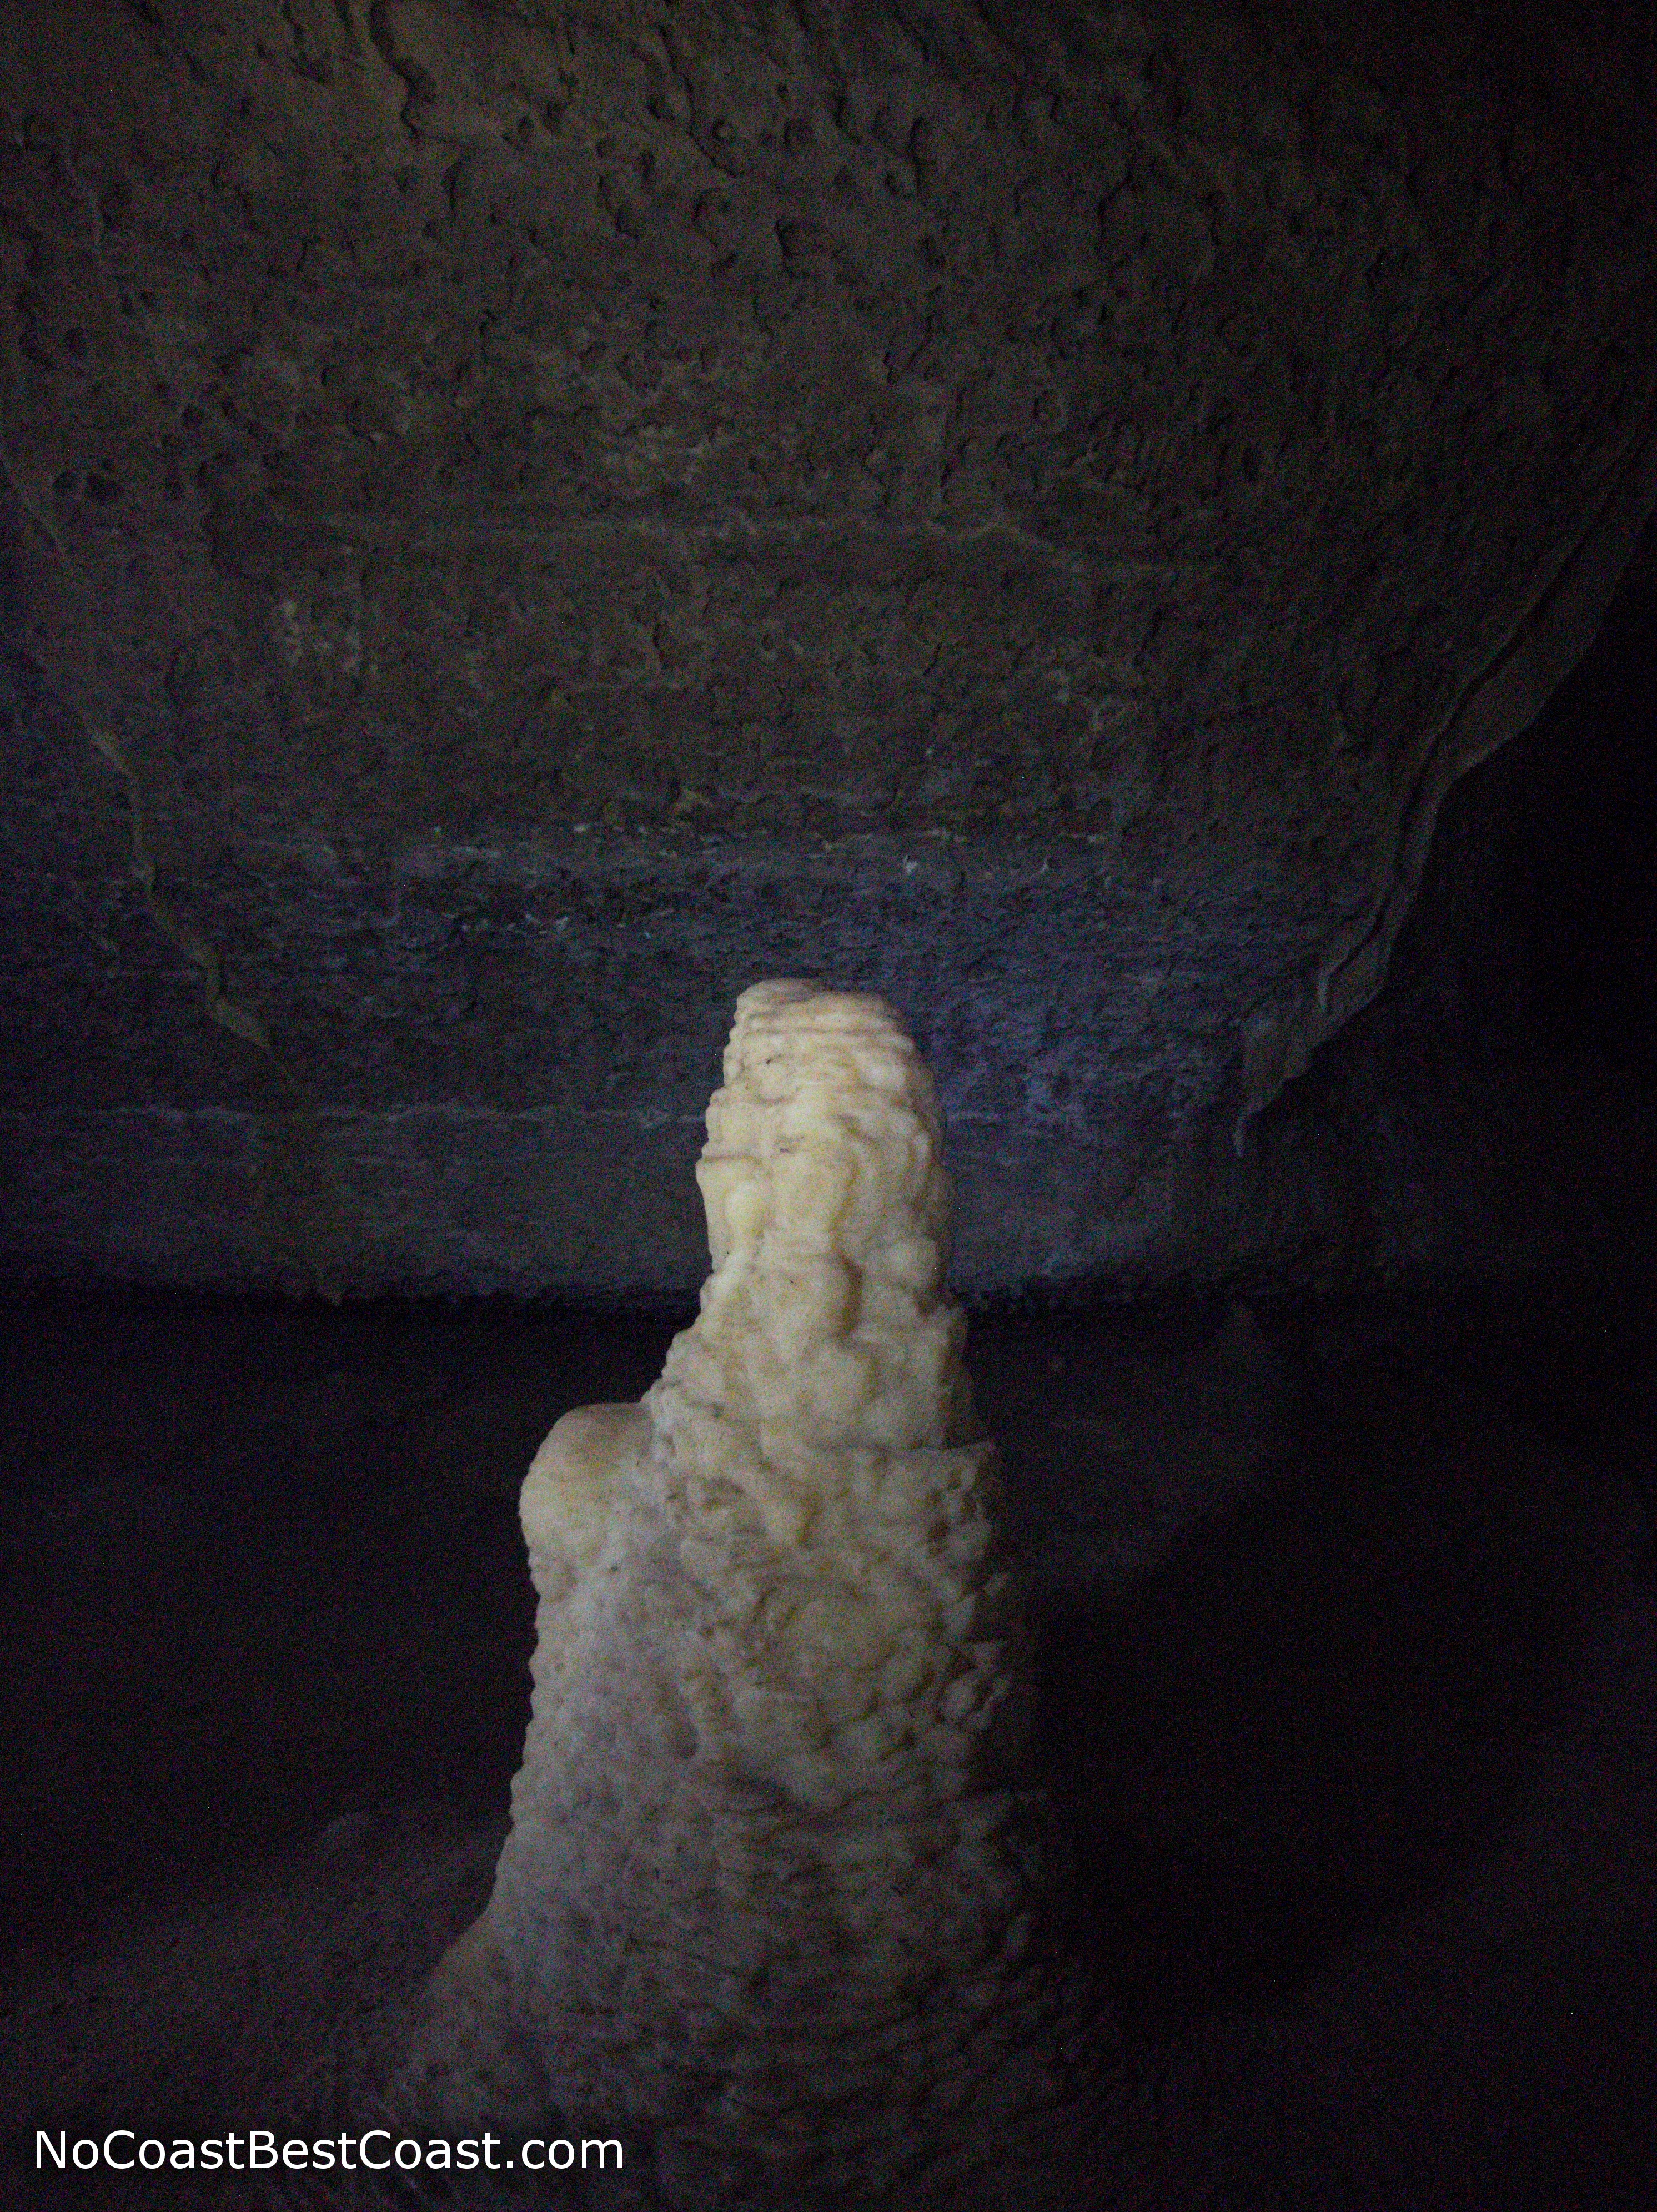 After this tour, you will finally remember that this is a stalagmite and not a stalactite